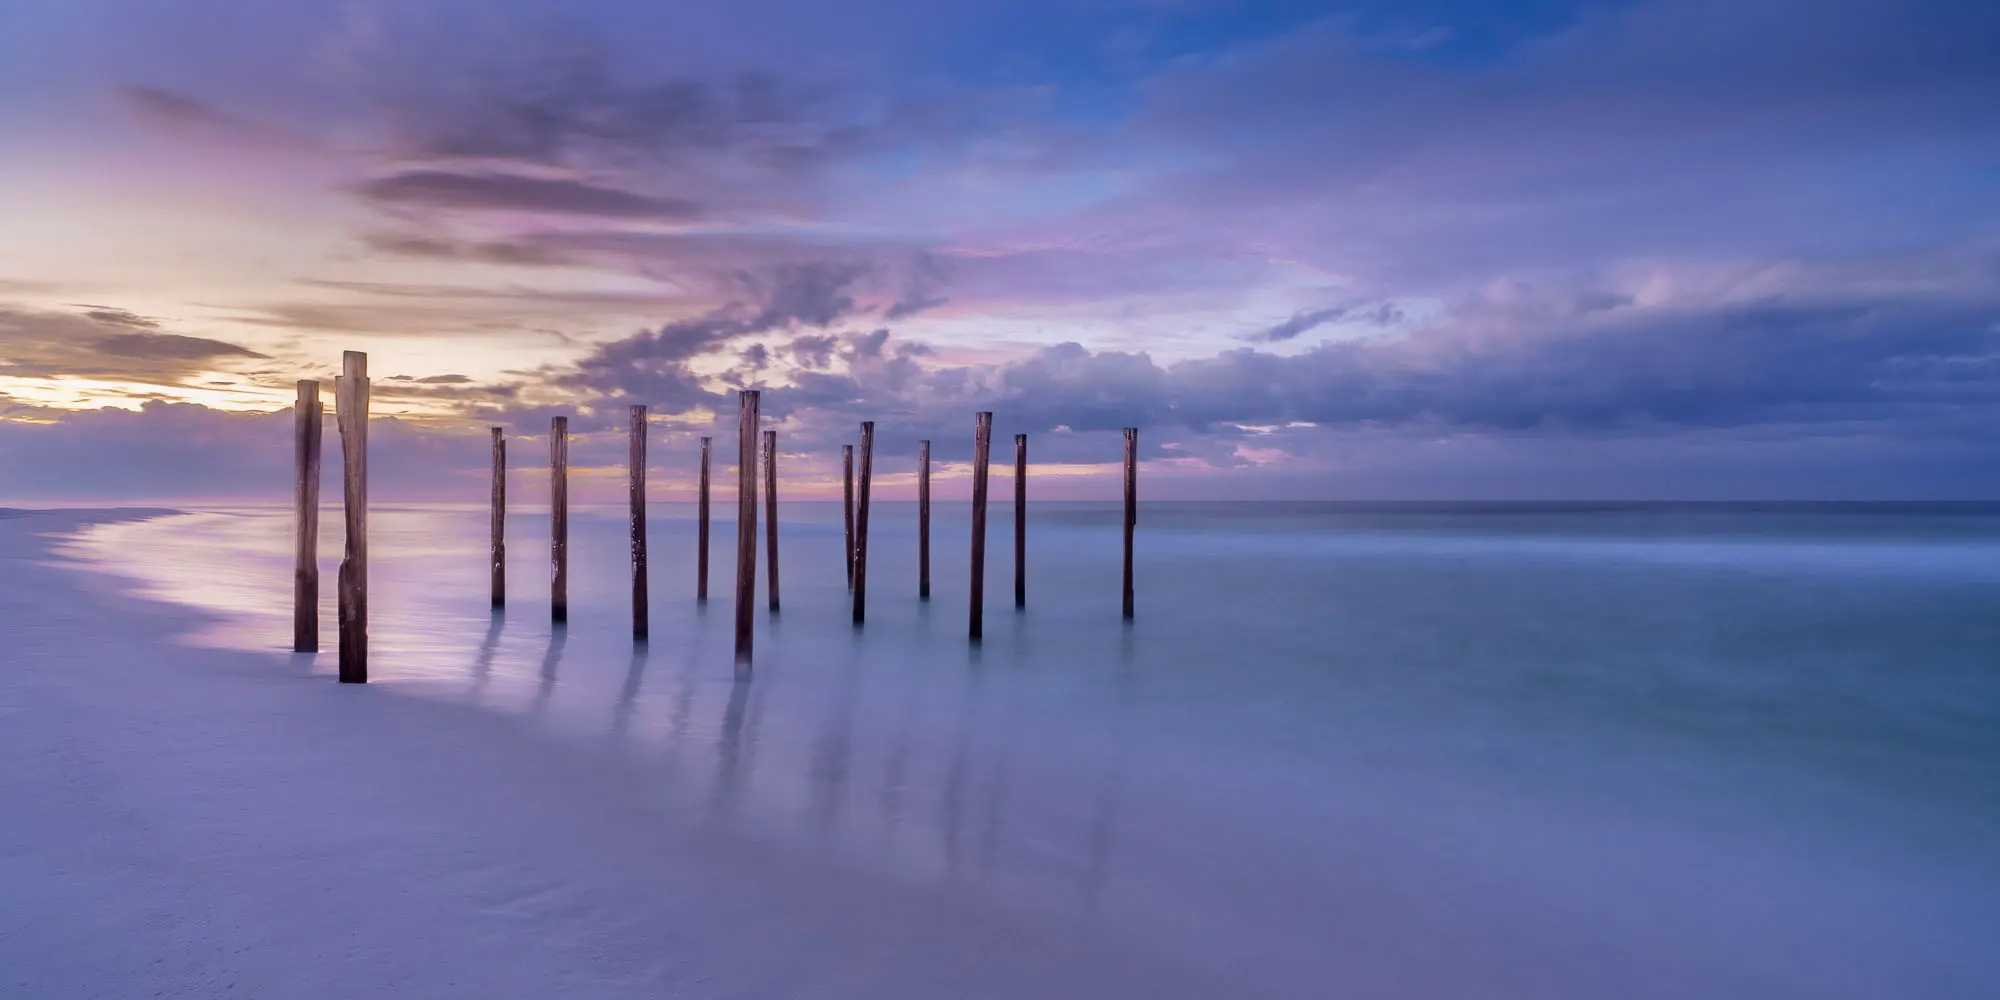 Poles stick out of sand at the beach sunrise.